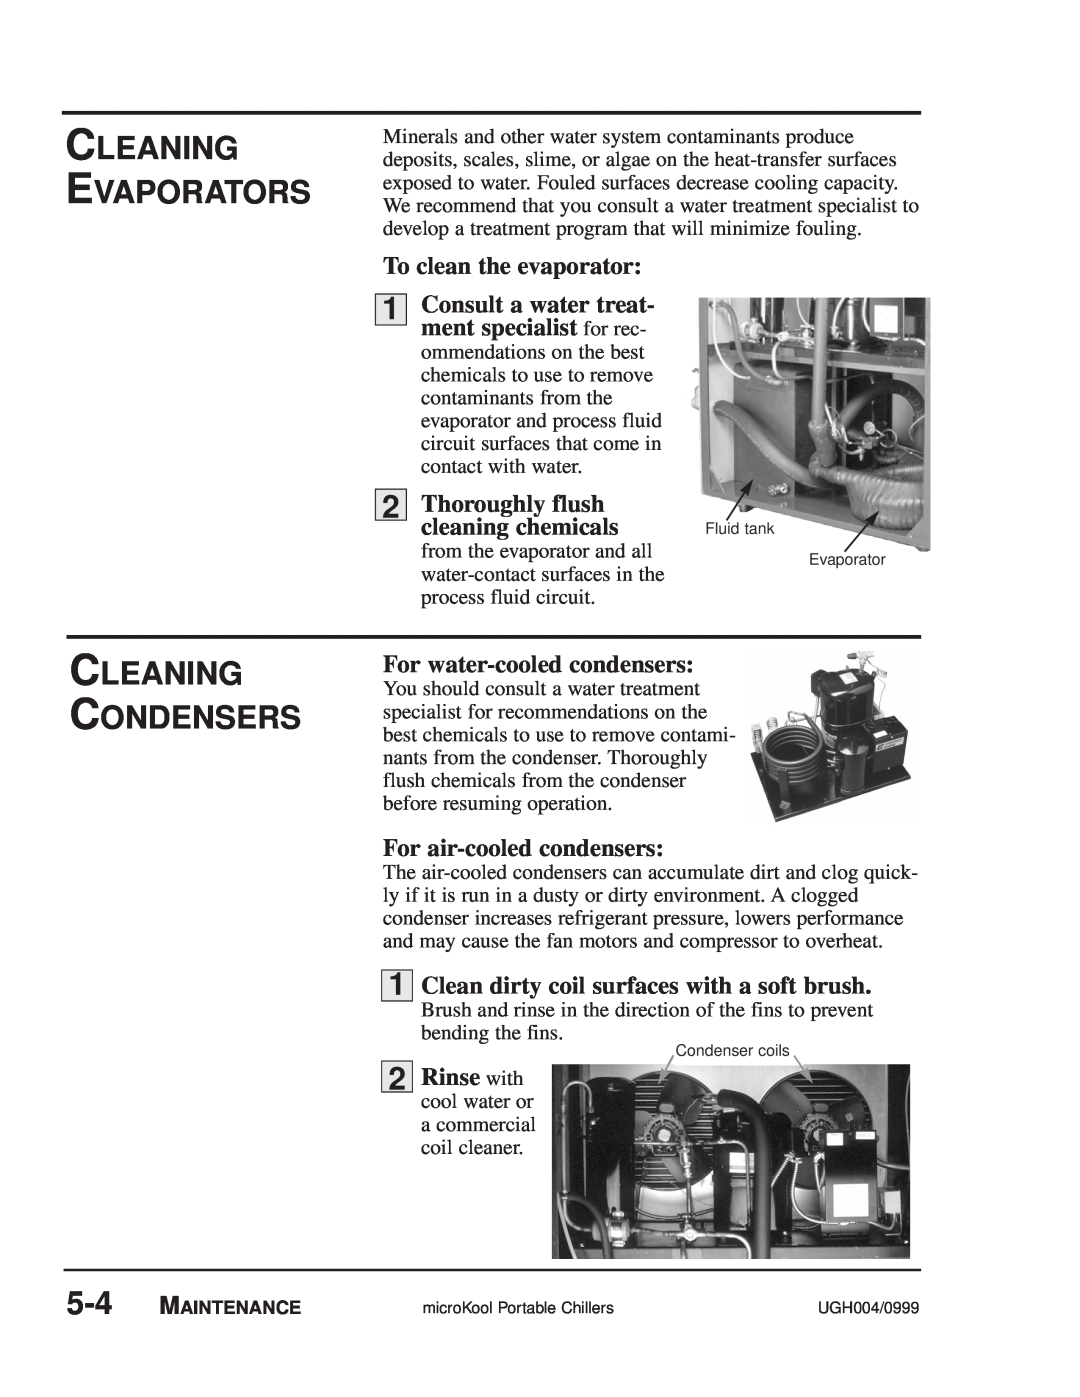 Conair MPA Cleaning Evaporators, Cleaning Condensers, To clean the evaporator, Consult a water treat, Thoroughly flush 